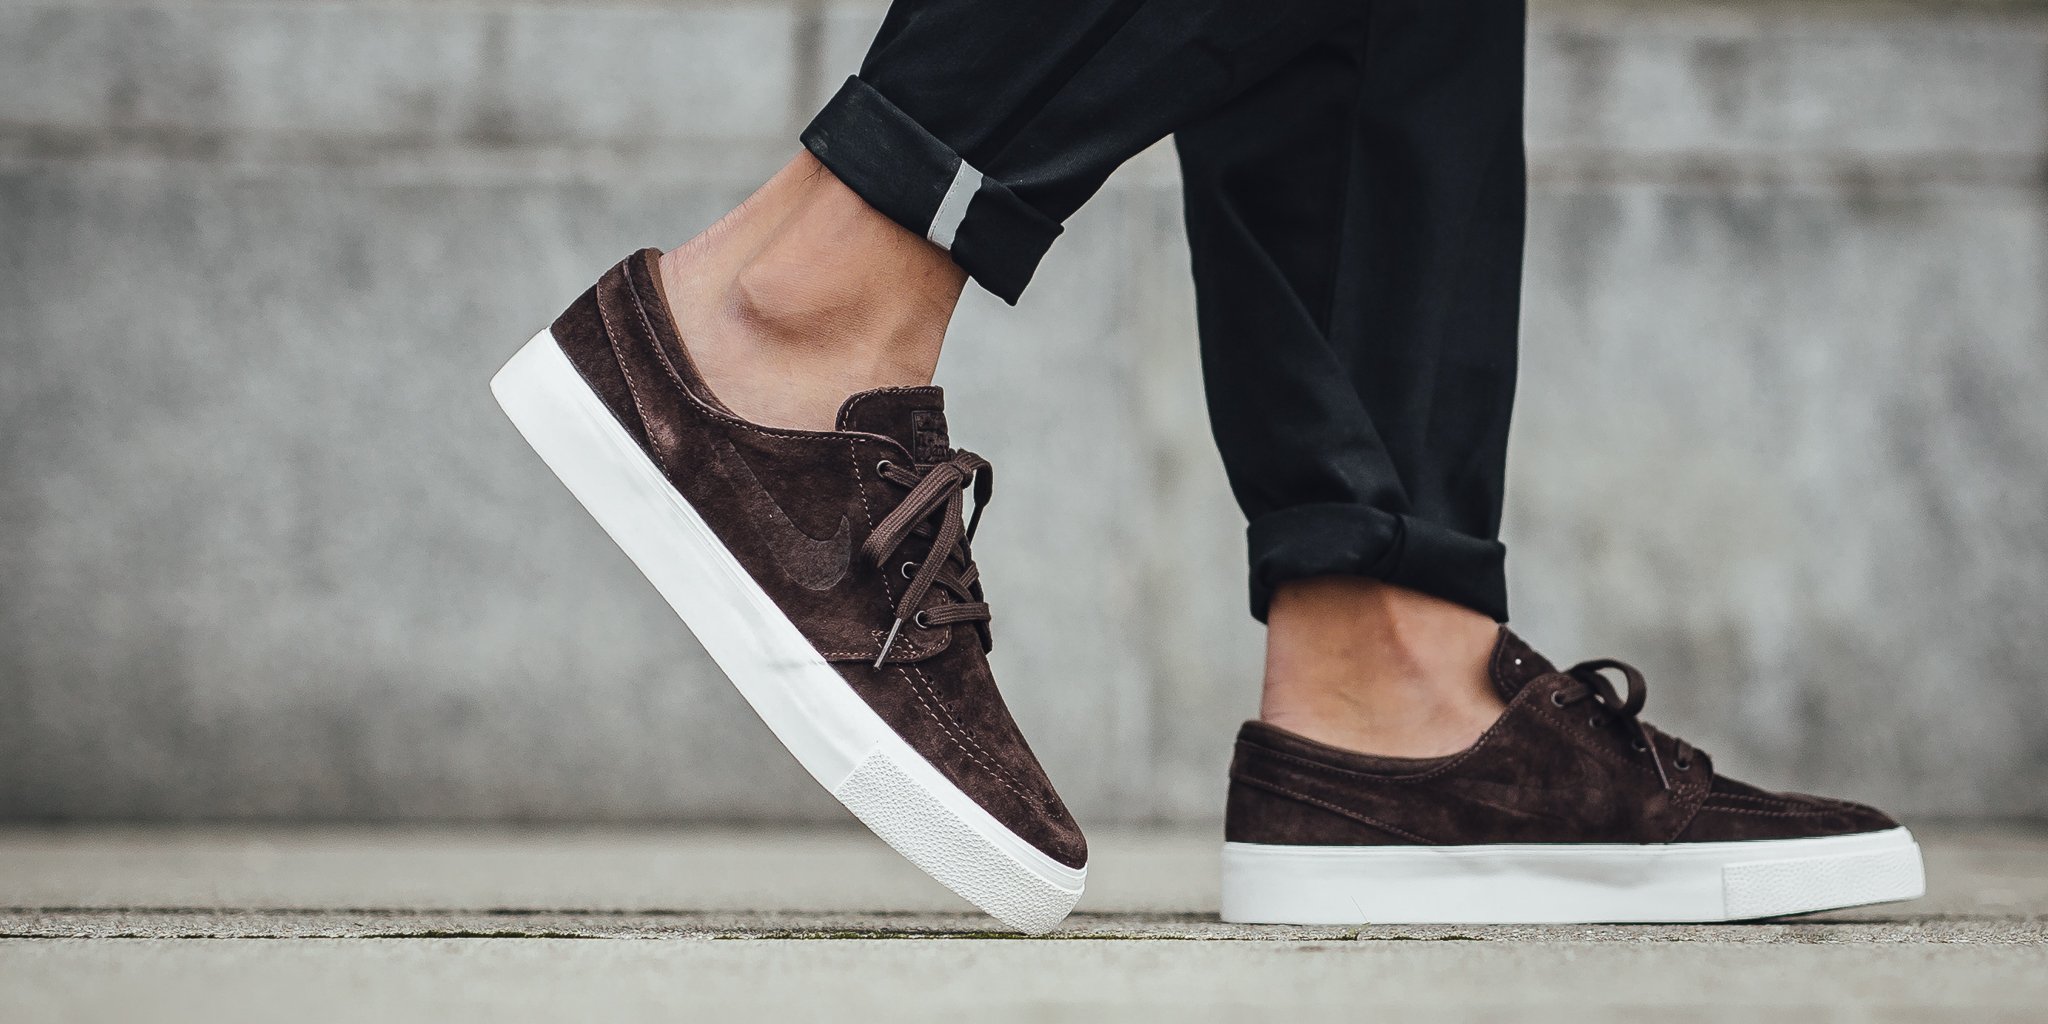 Titolo on "NEW IN! Nike SB Zoom Stefan Janoski HT Baroque Brown/Baroque Brown-Ivory SHOP HERE: https://t.co/c7HDiAYRZ1 https://t.co/RLrw3HrGF9" / Twitter